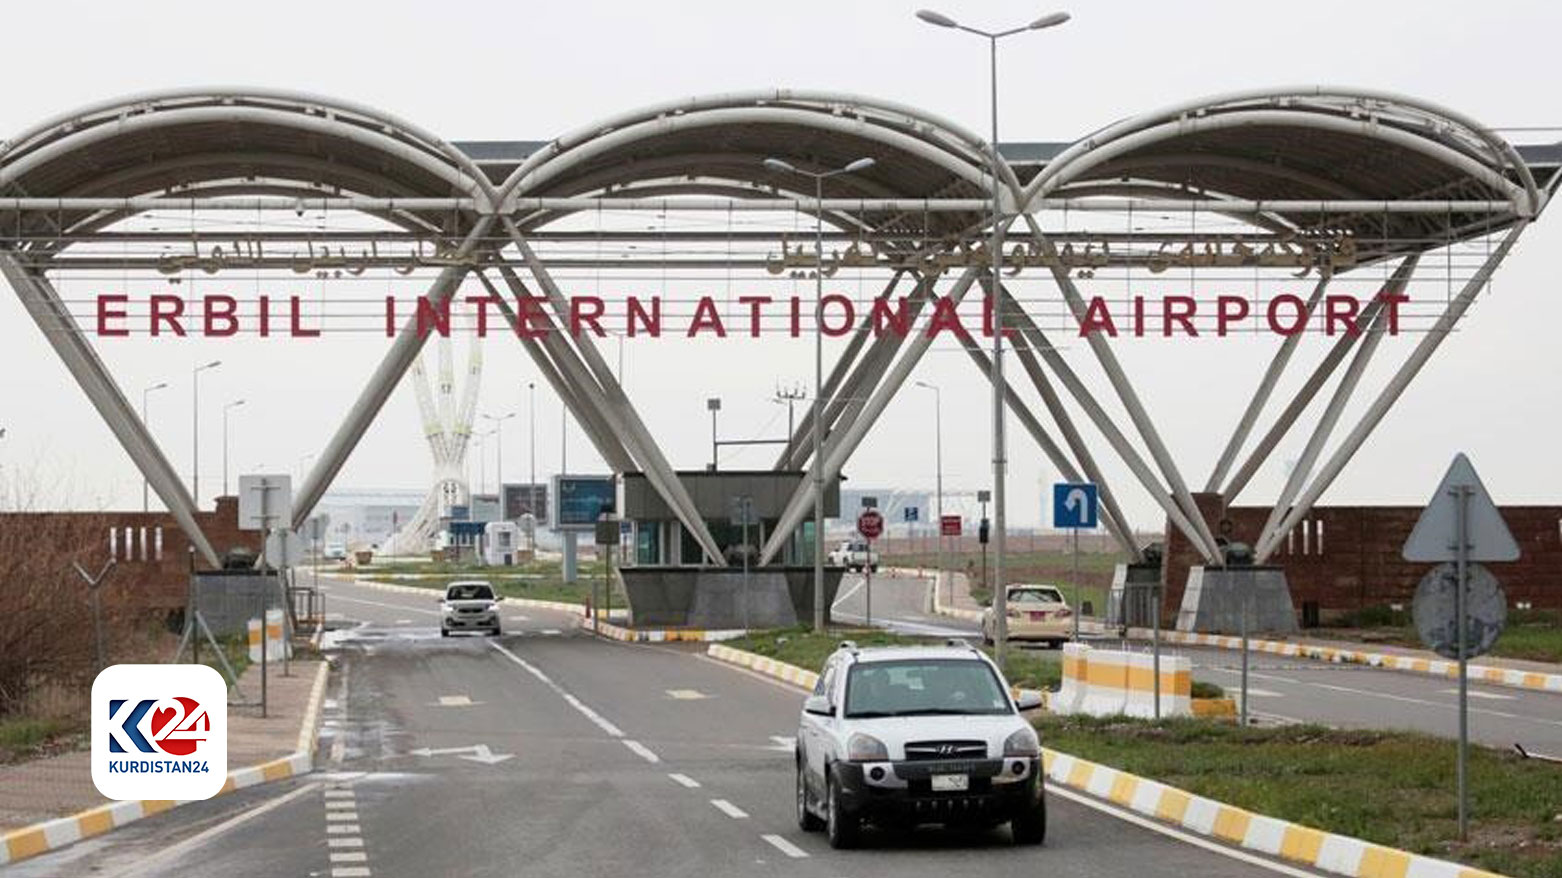 The Entrance Gate of Erbil International Airport (EIA) - (Photo: Archive)